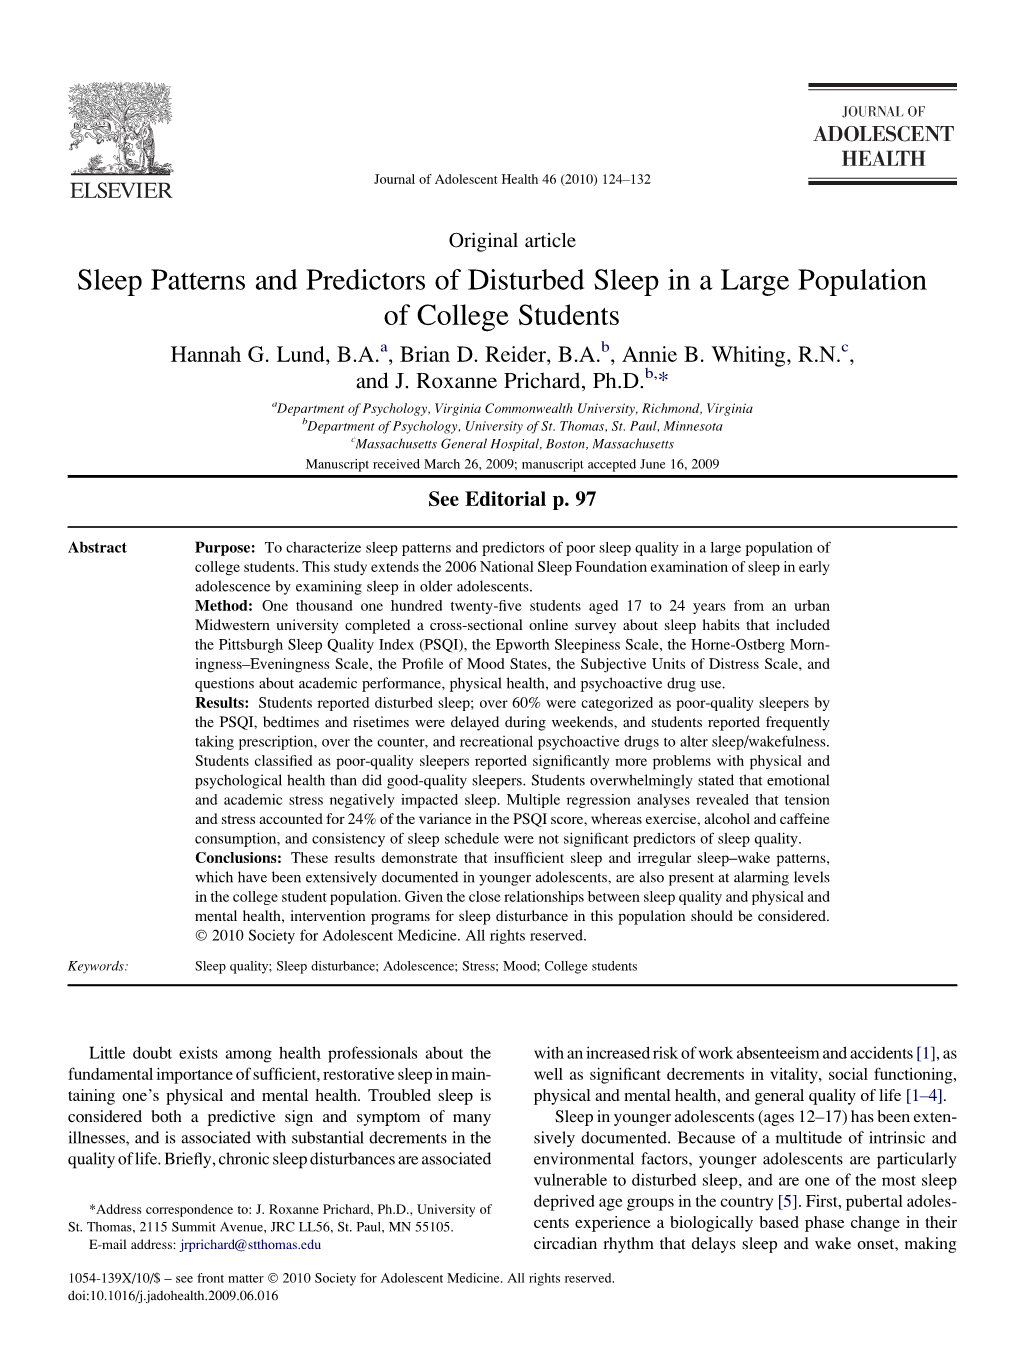 Sleep Patterns and Predictors of College Students